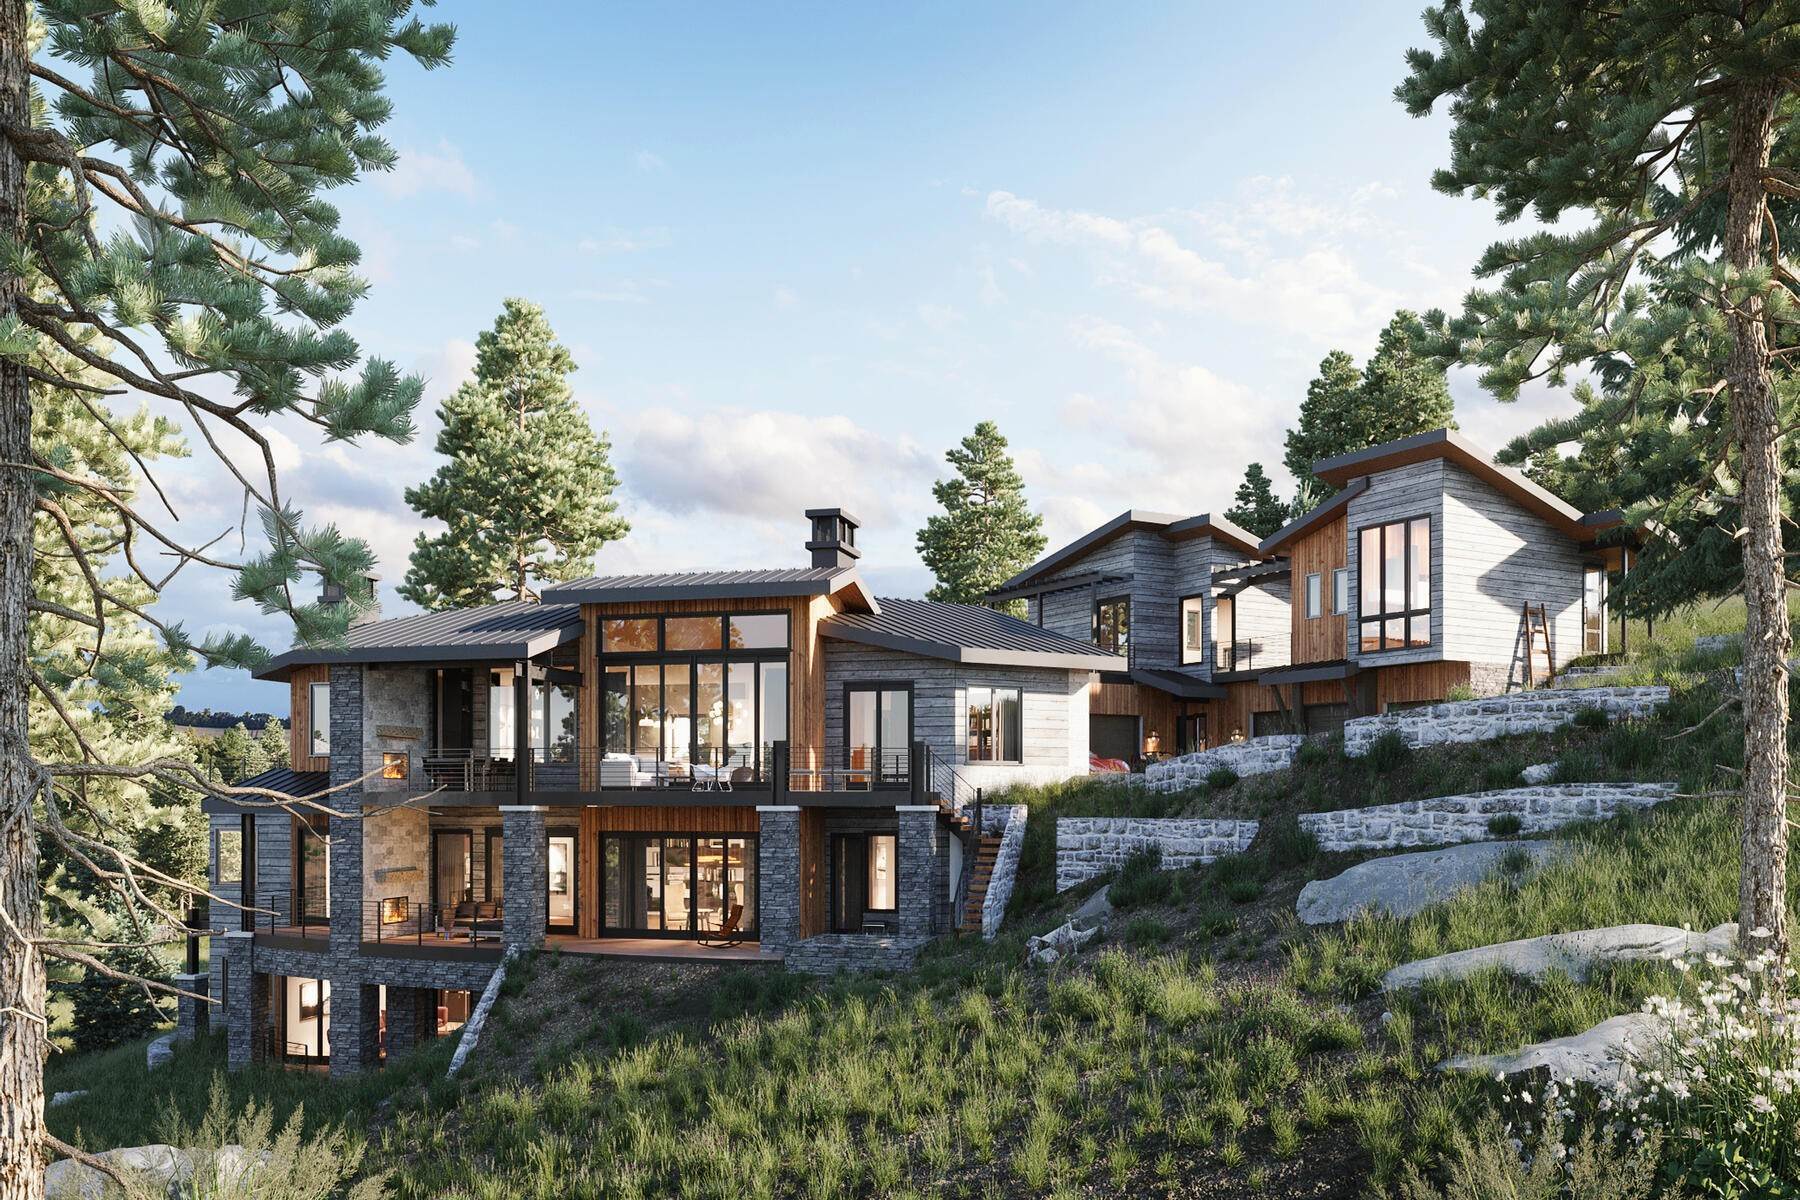 Property for Sale at Stunning design merge with elevated mountain views overlooking Promontory 9319 Golden Spike Ct Park City, Utah 84098 United States